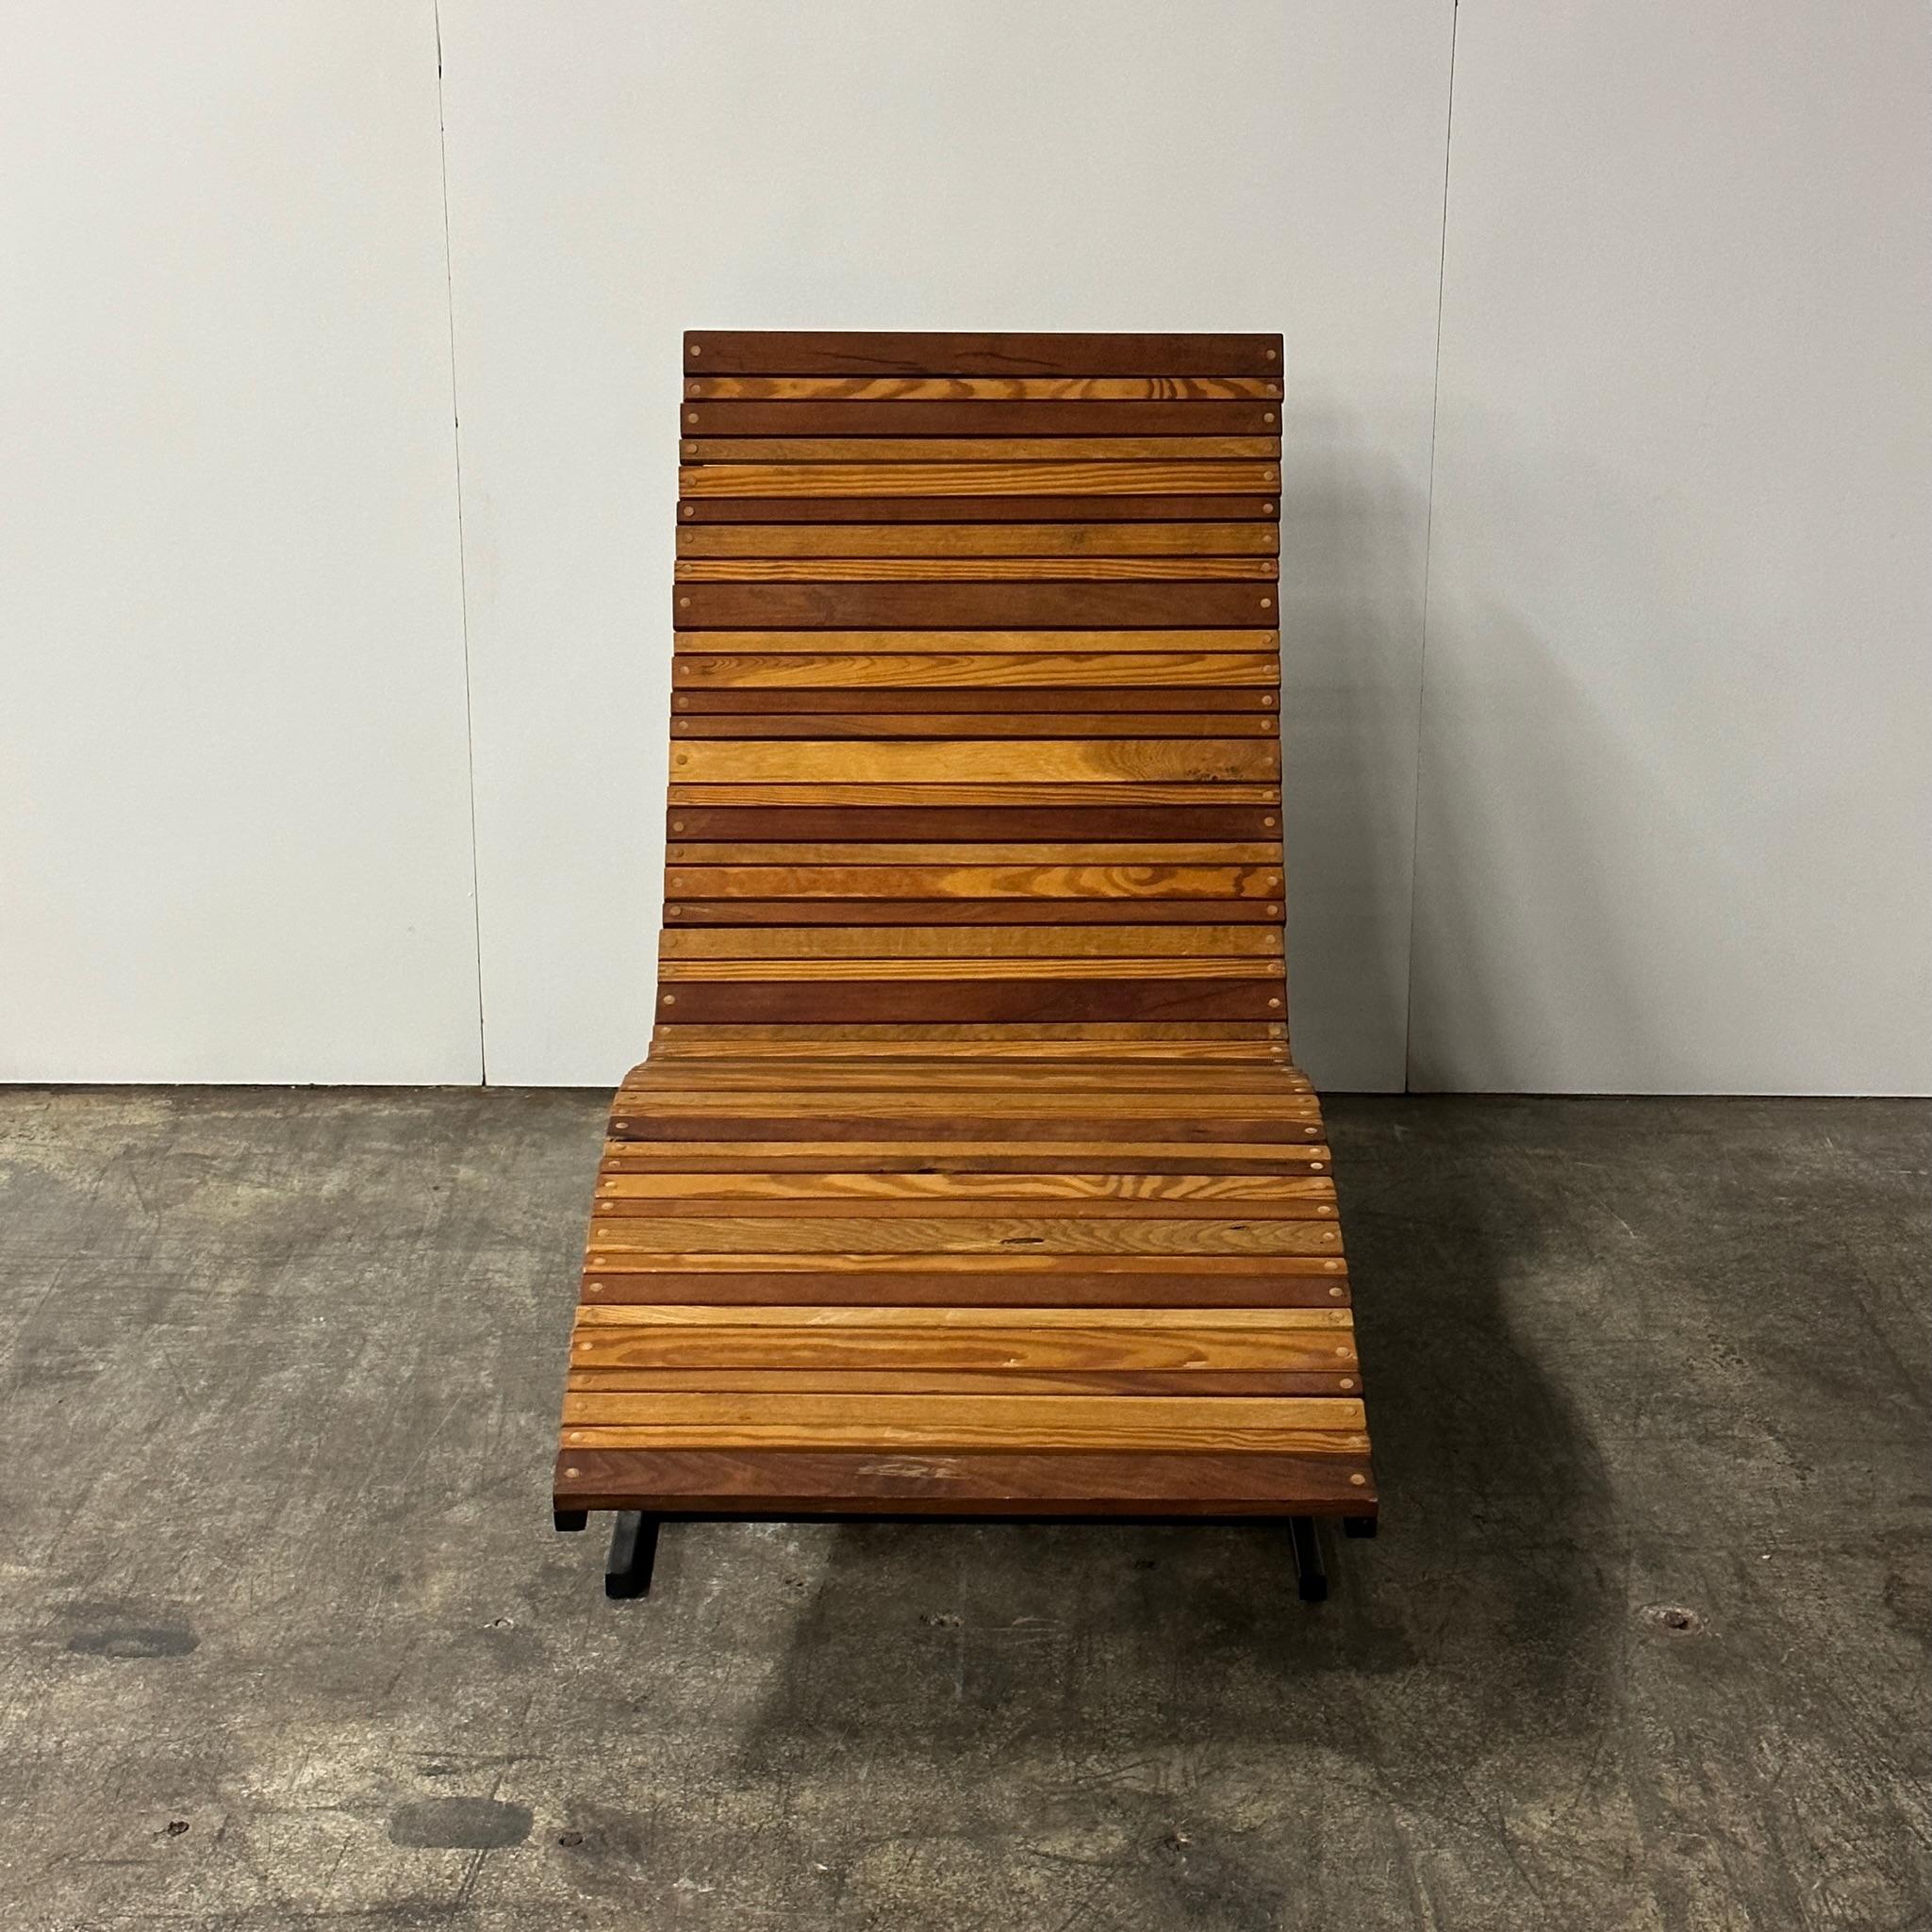 Studio Made Wood Slat Chaise In Good Condition For Sale In Chicago, IL